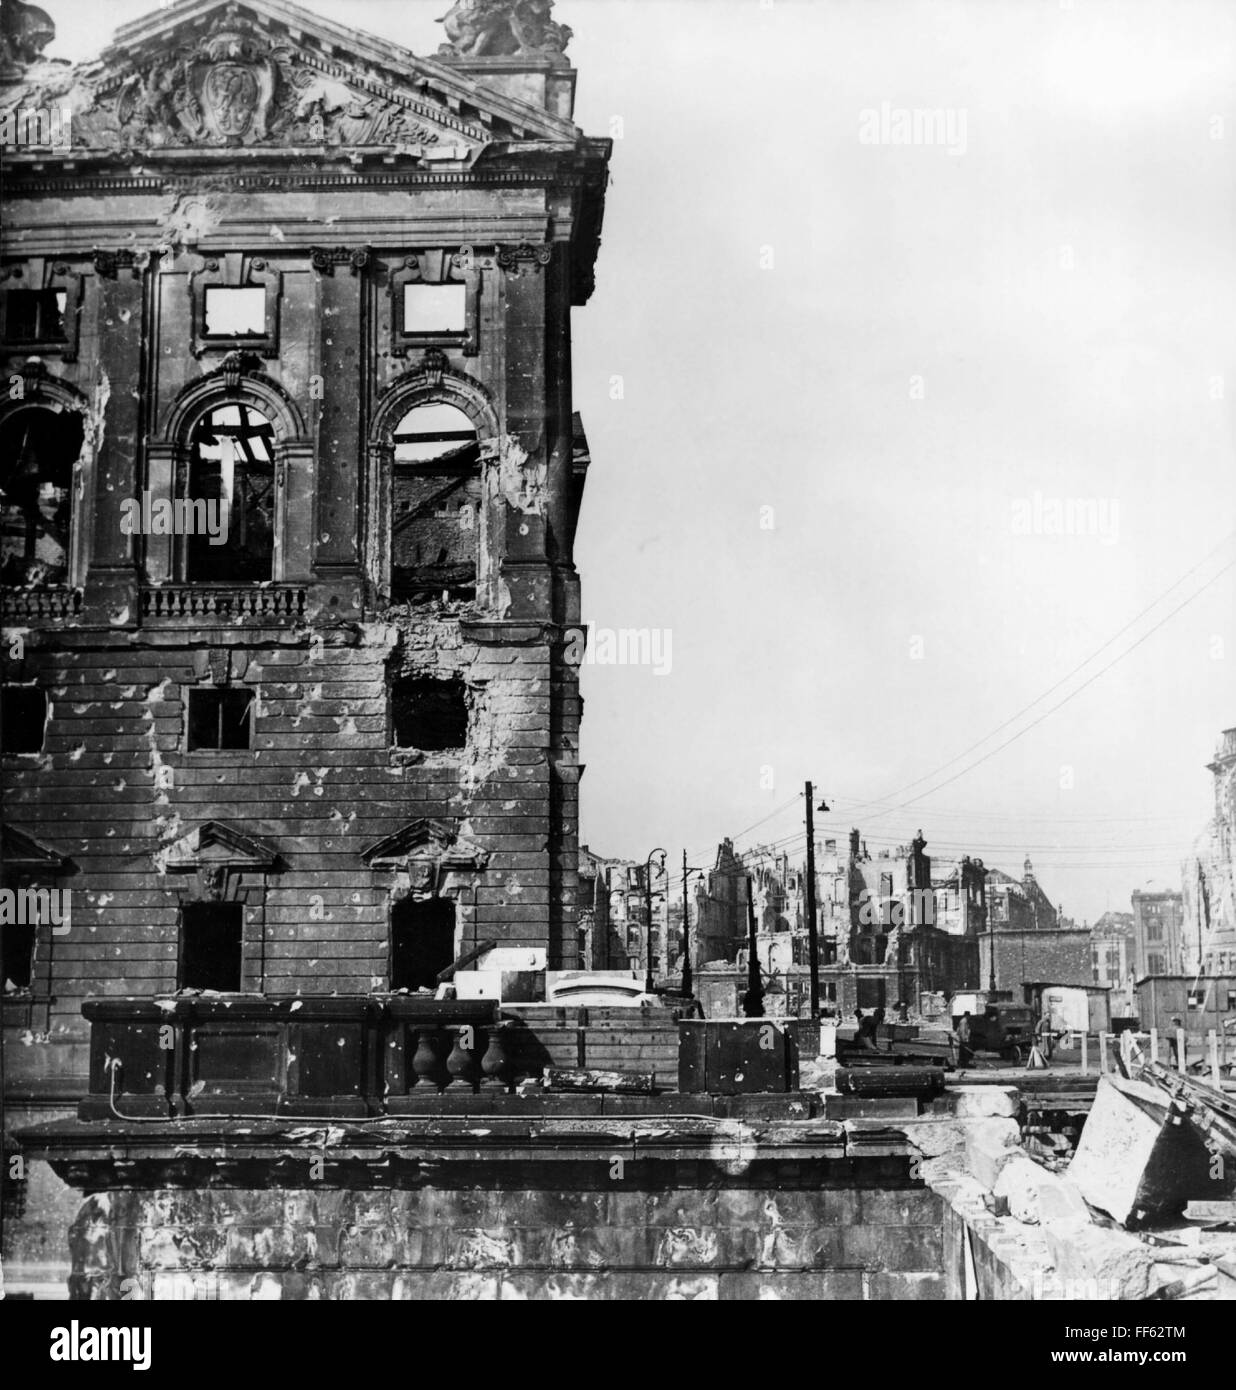 postwar period, destroyed cities, Berlin, Germany, ruin of the Neuer Marstall (New Stable) shortly after the end of World War II, 1945, Additional-Rights-Clearences-Not Available Stock Photo